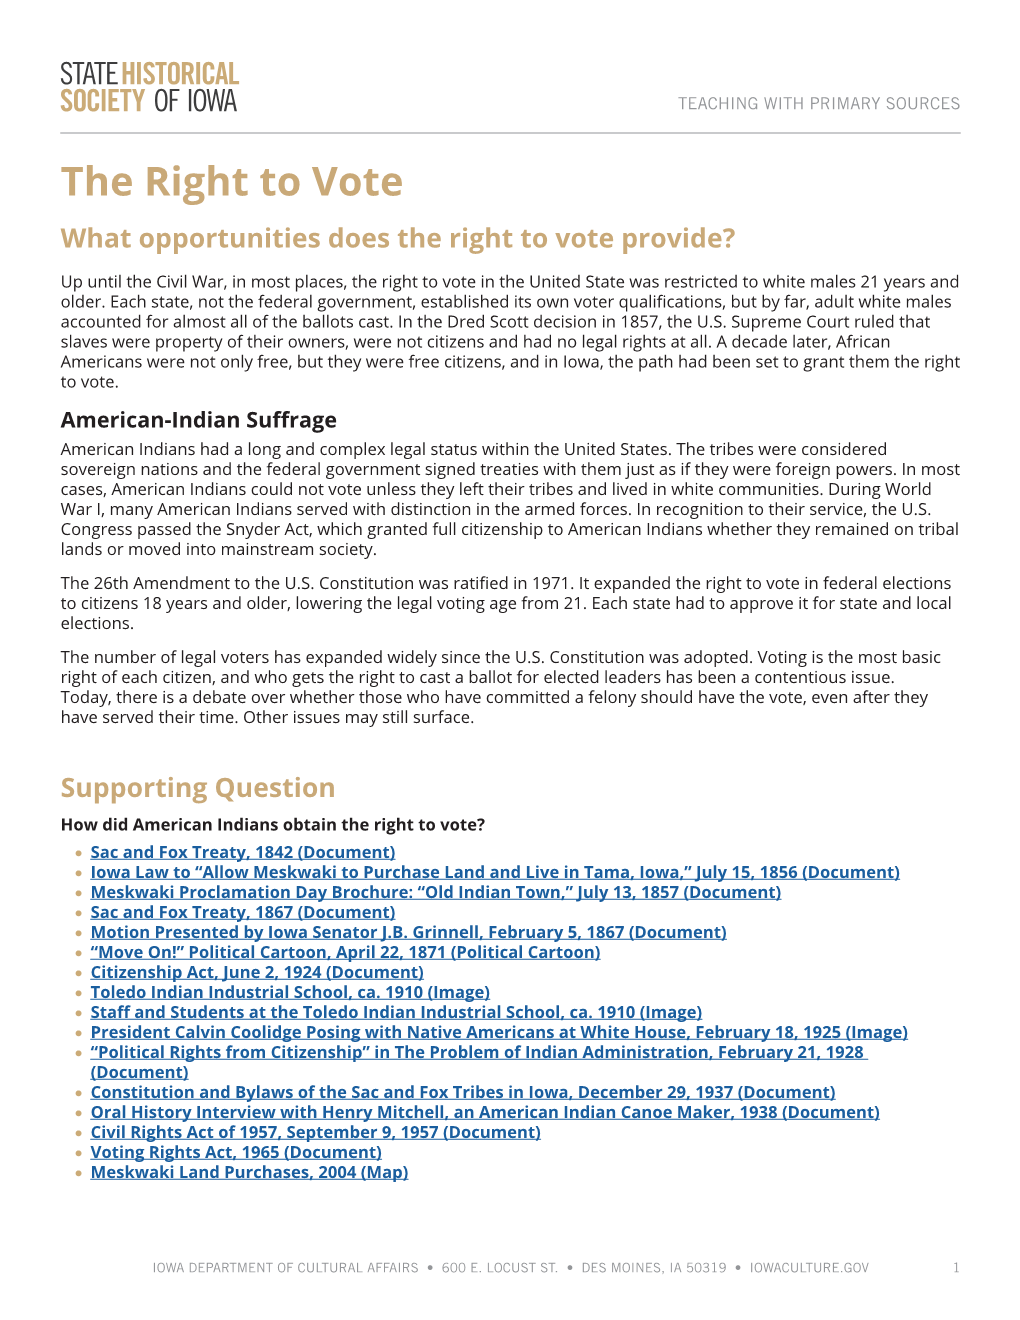 The Right to Vote What Opportunities Does the Right to Vote Provide?